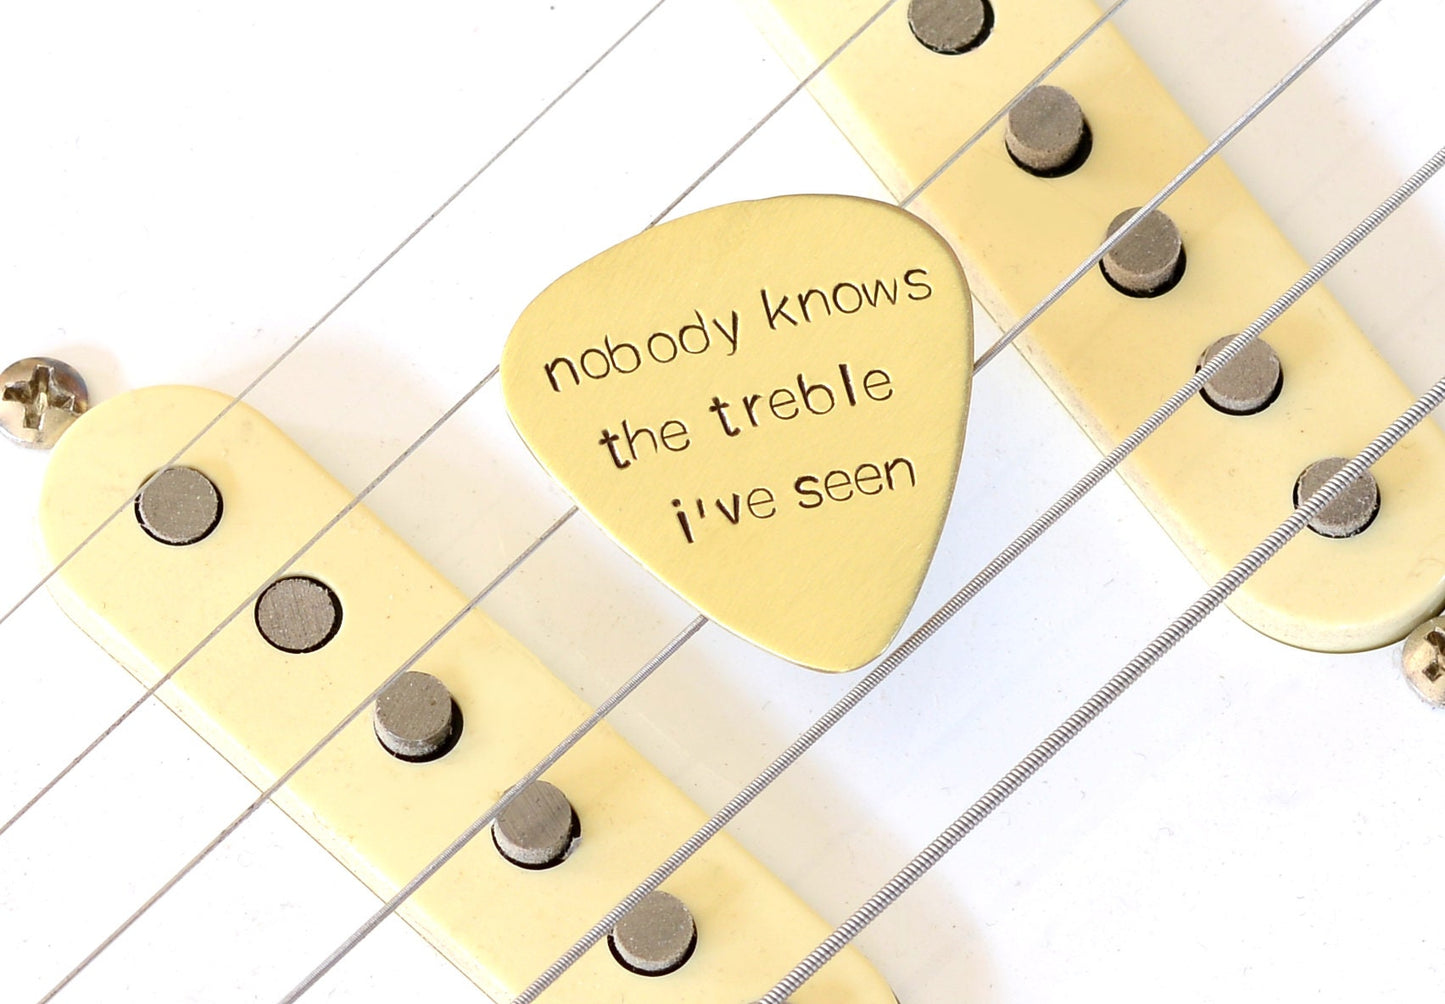 Guitar Pick stamped with Nobody knows the Treble I’ve seen